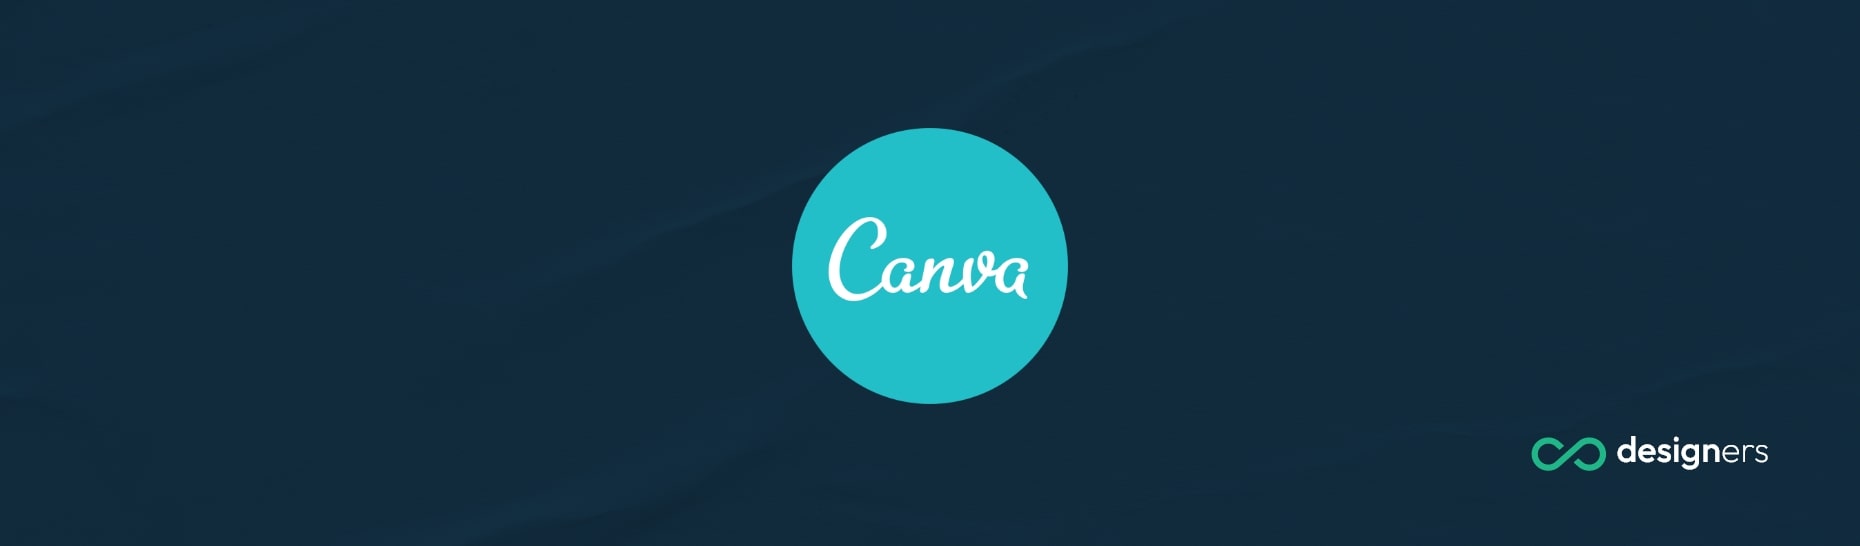 What Font Is Helvetica in Canva?